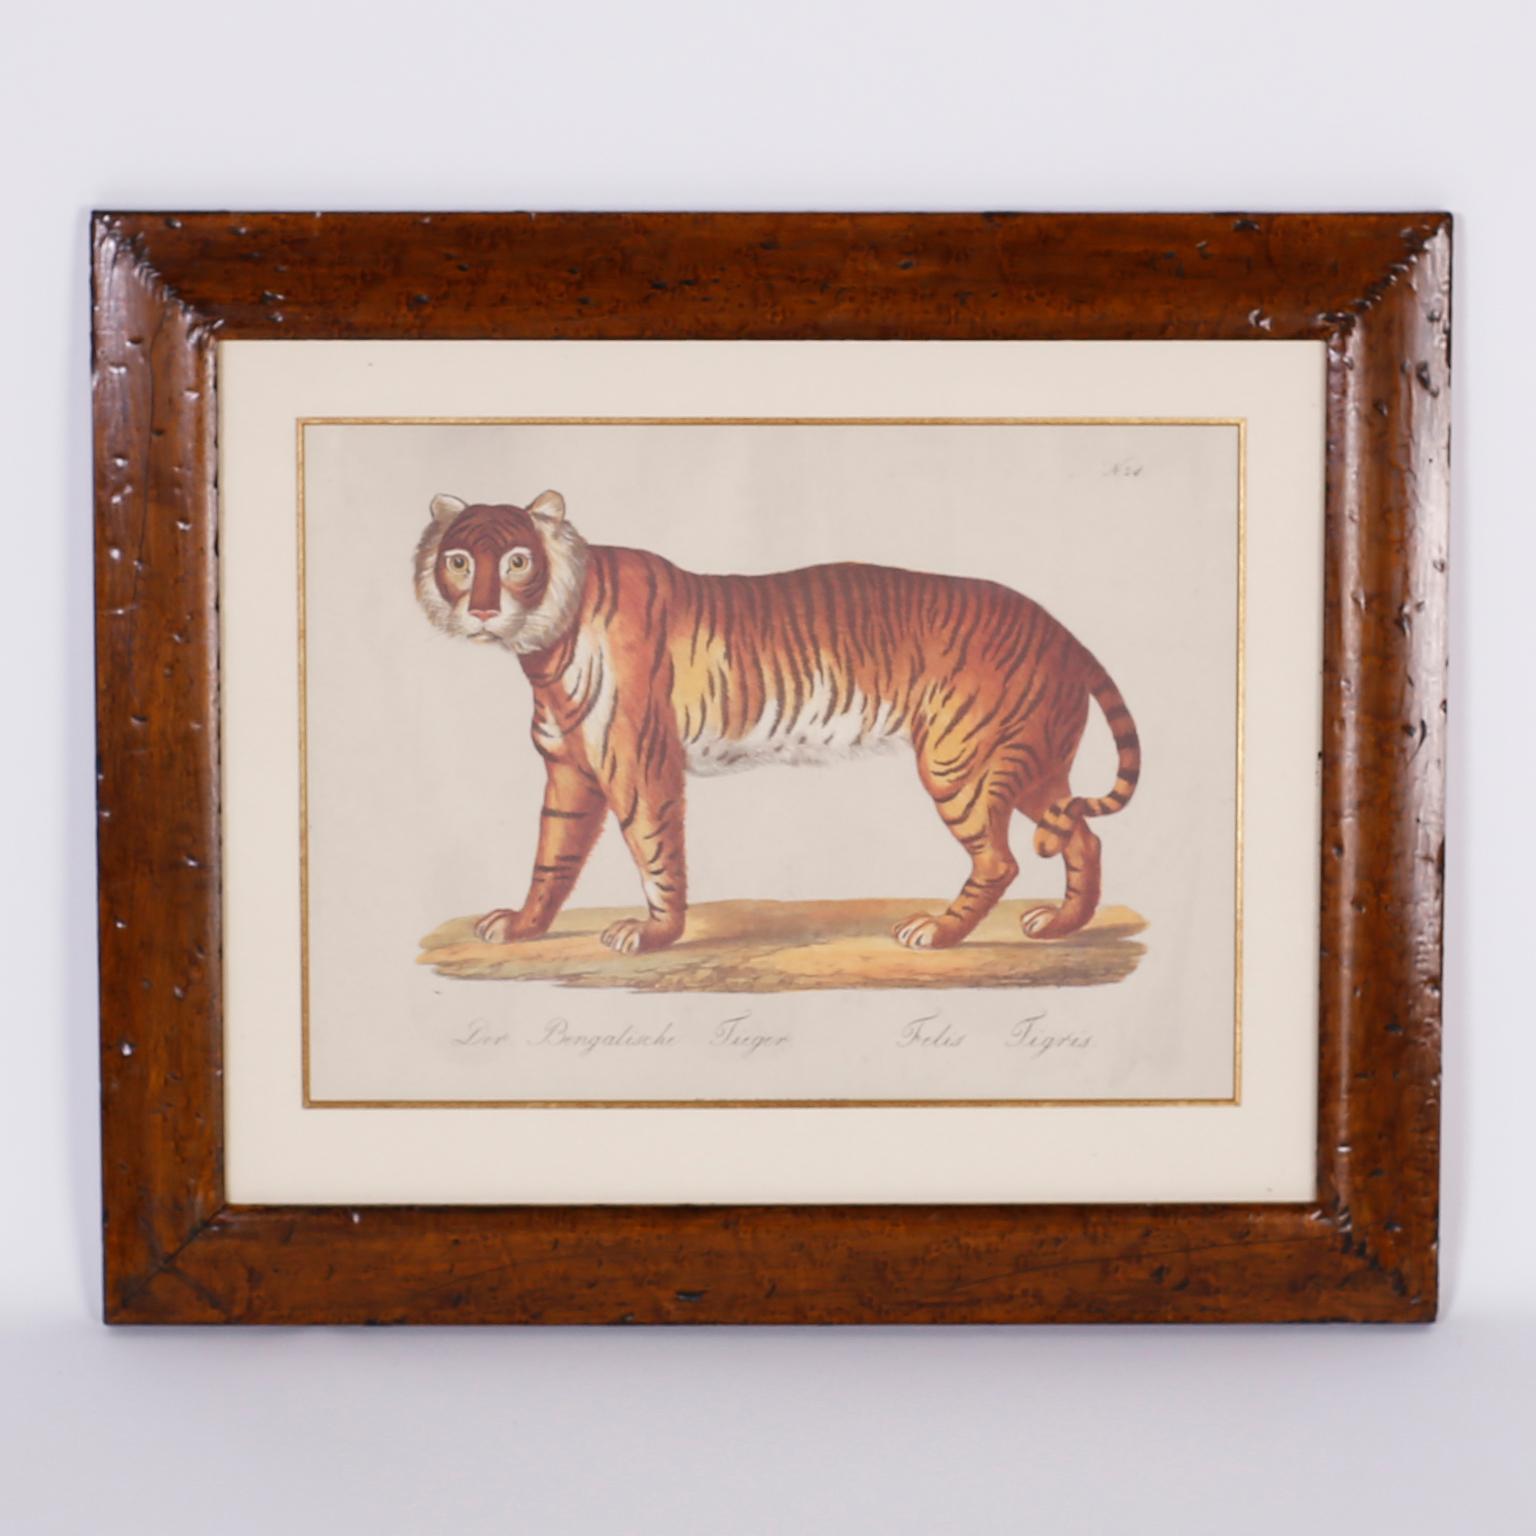 Set of four German prints depicting a tiger, a leopard, a male lion, and a female lion with her cub all in the naive style of the early naturalists, matted and presented in rustic wood frames under glass.